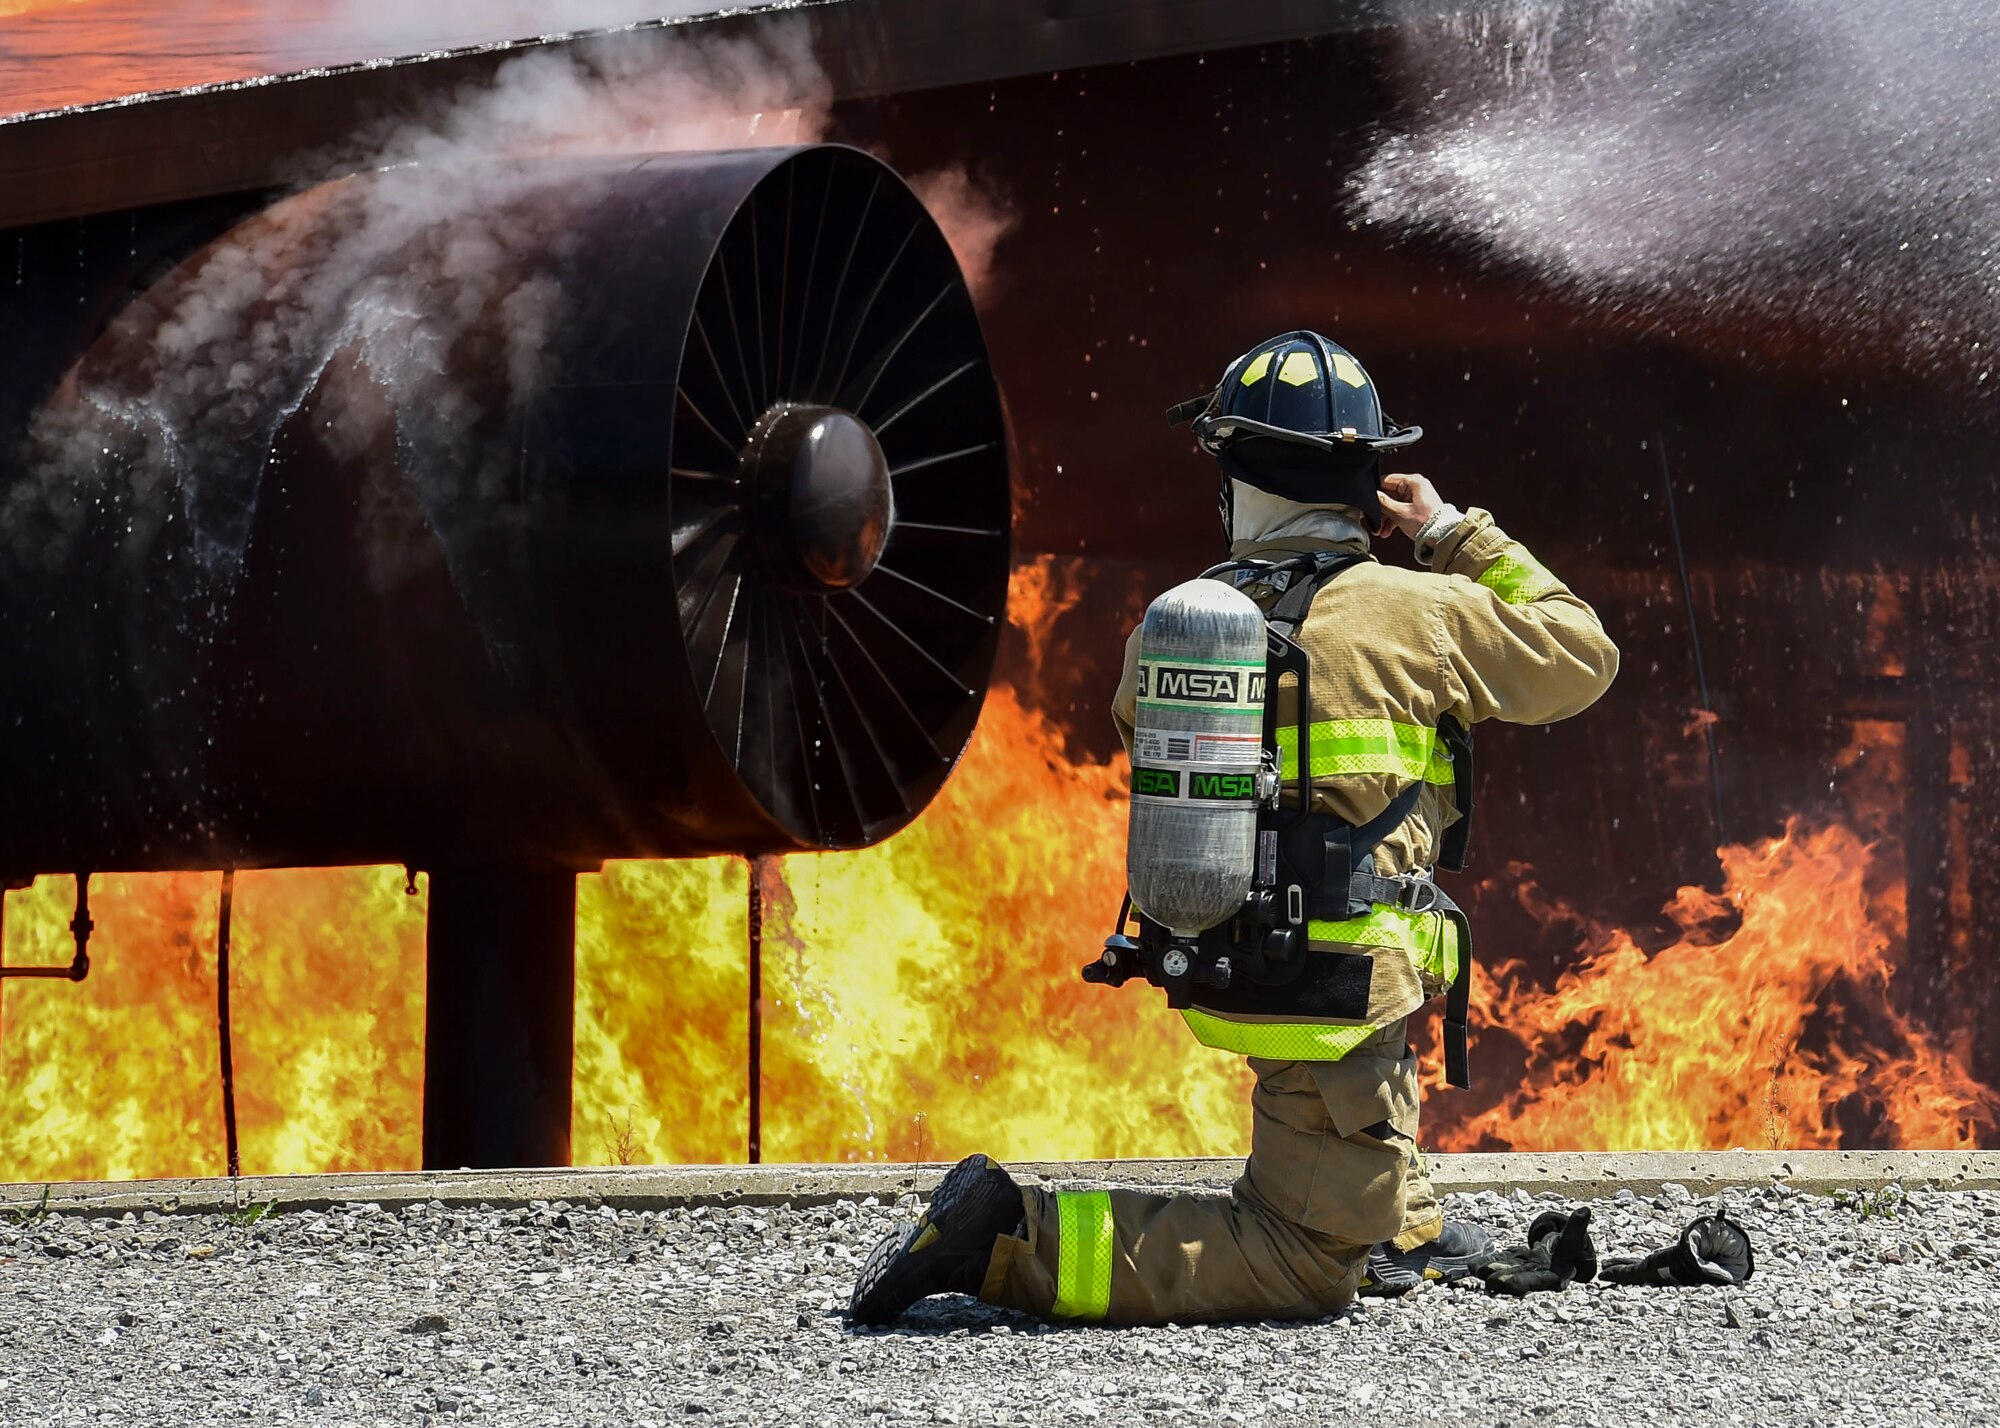 An Army firefighter of the 5694th Engineer Detachment from the Army National Guard stationed in Mansfield, Ohio, straps on his fire helmet after donning his gas mask during an airport rescue firefighting exercise July 18, 2017, here. The 5694th is at YARS for one week while completing their annual training. (U.S. Air Force Photo/Senior Airman Jeffrey Grossi)